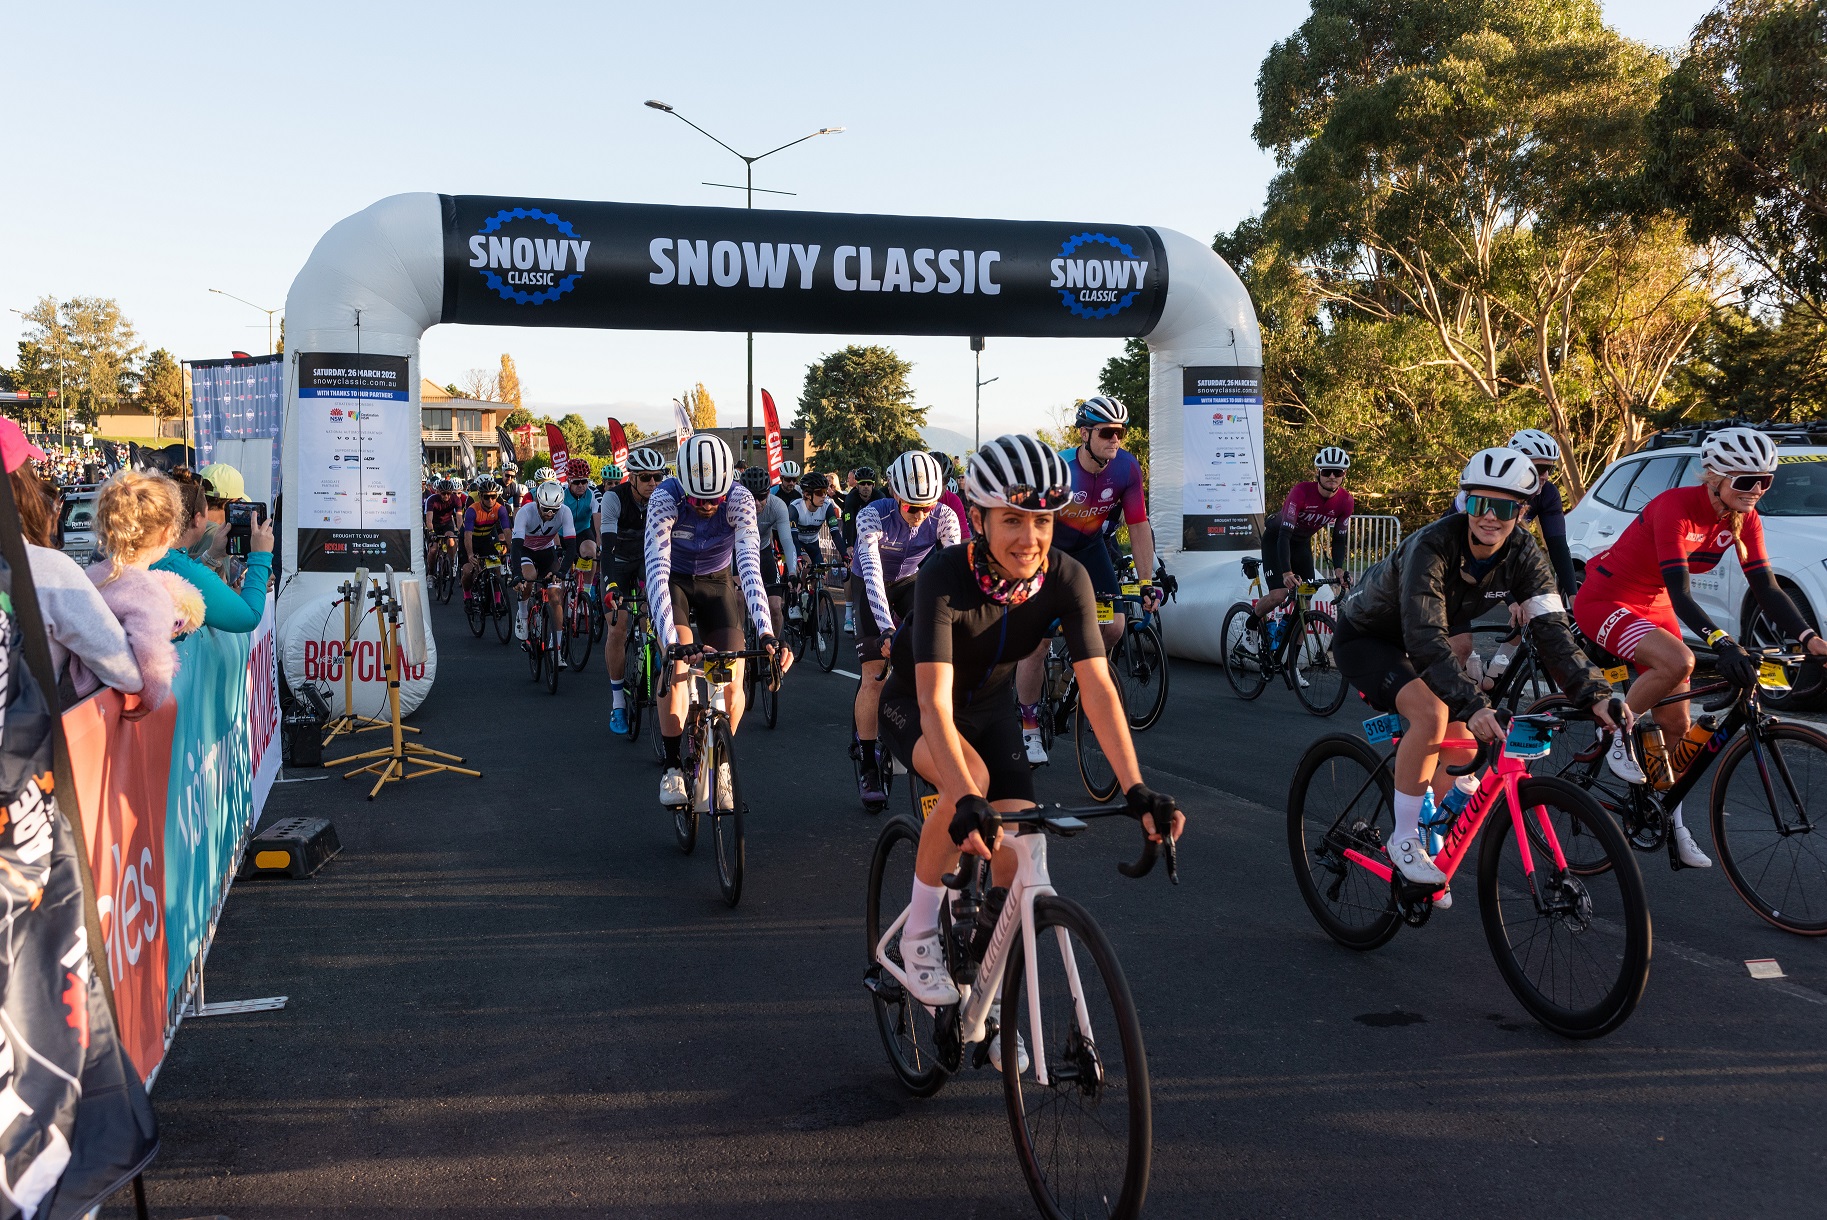 Over 1,300 cyclists expected for 2nd annual Snowy Classic Cycling Gran Fondo